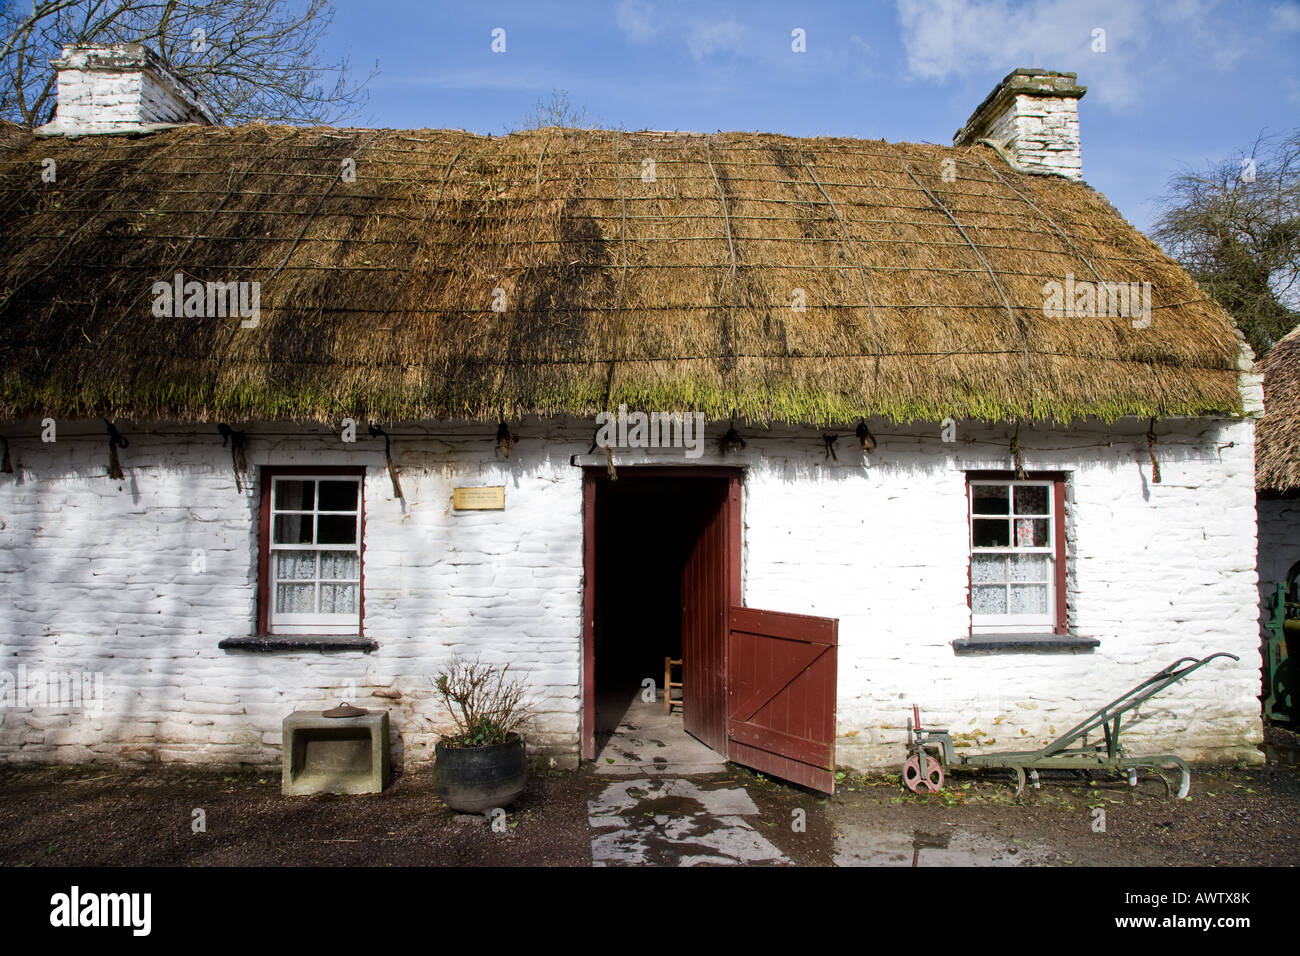 Irish cottage with thatched roof, County Clare, Ireland Stock Photo